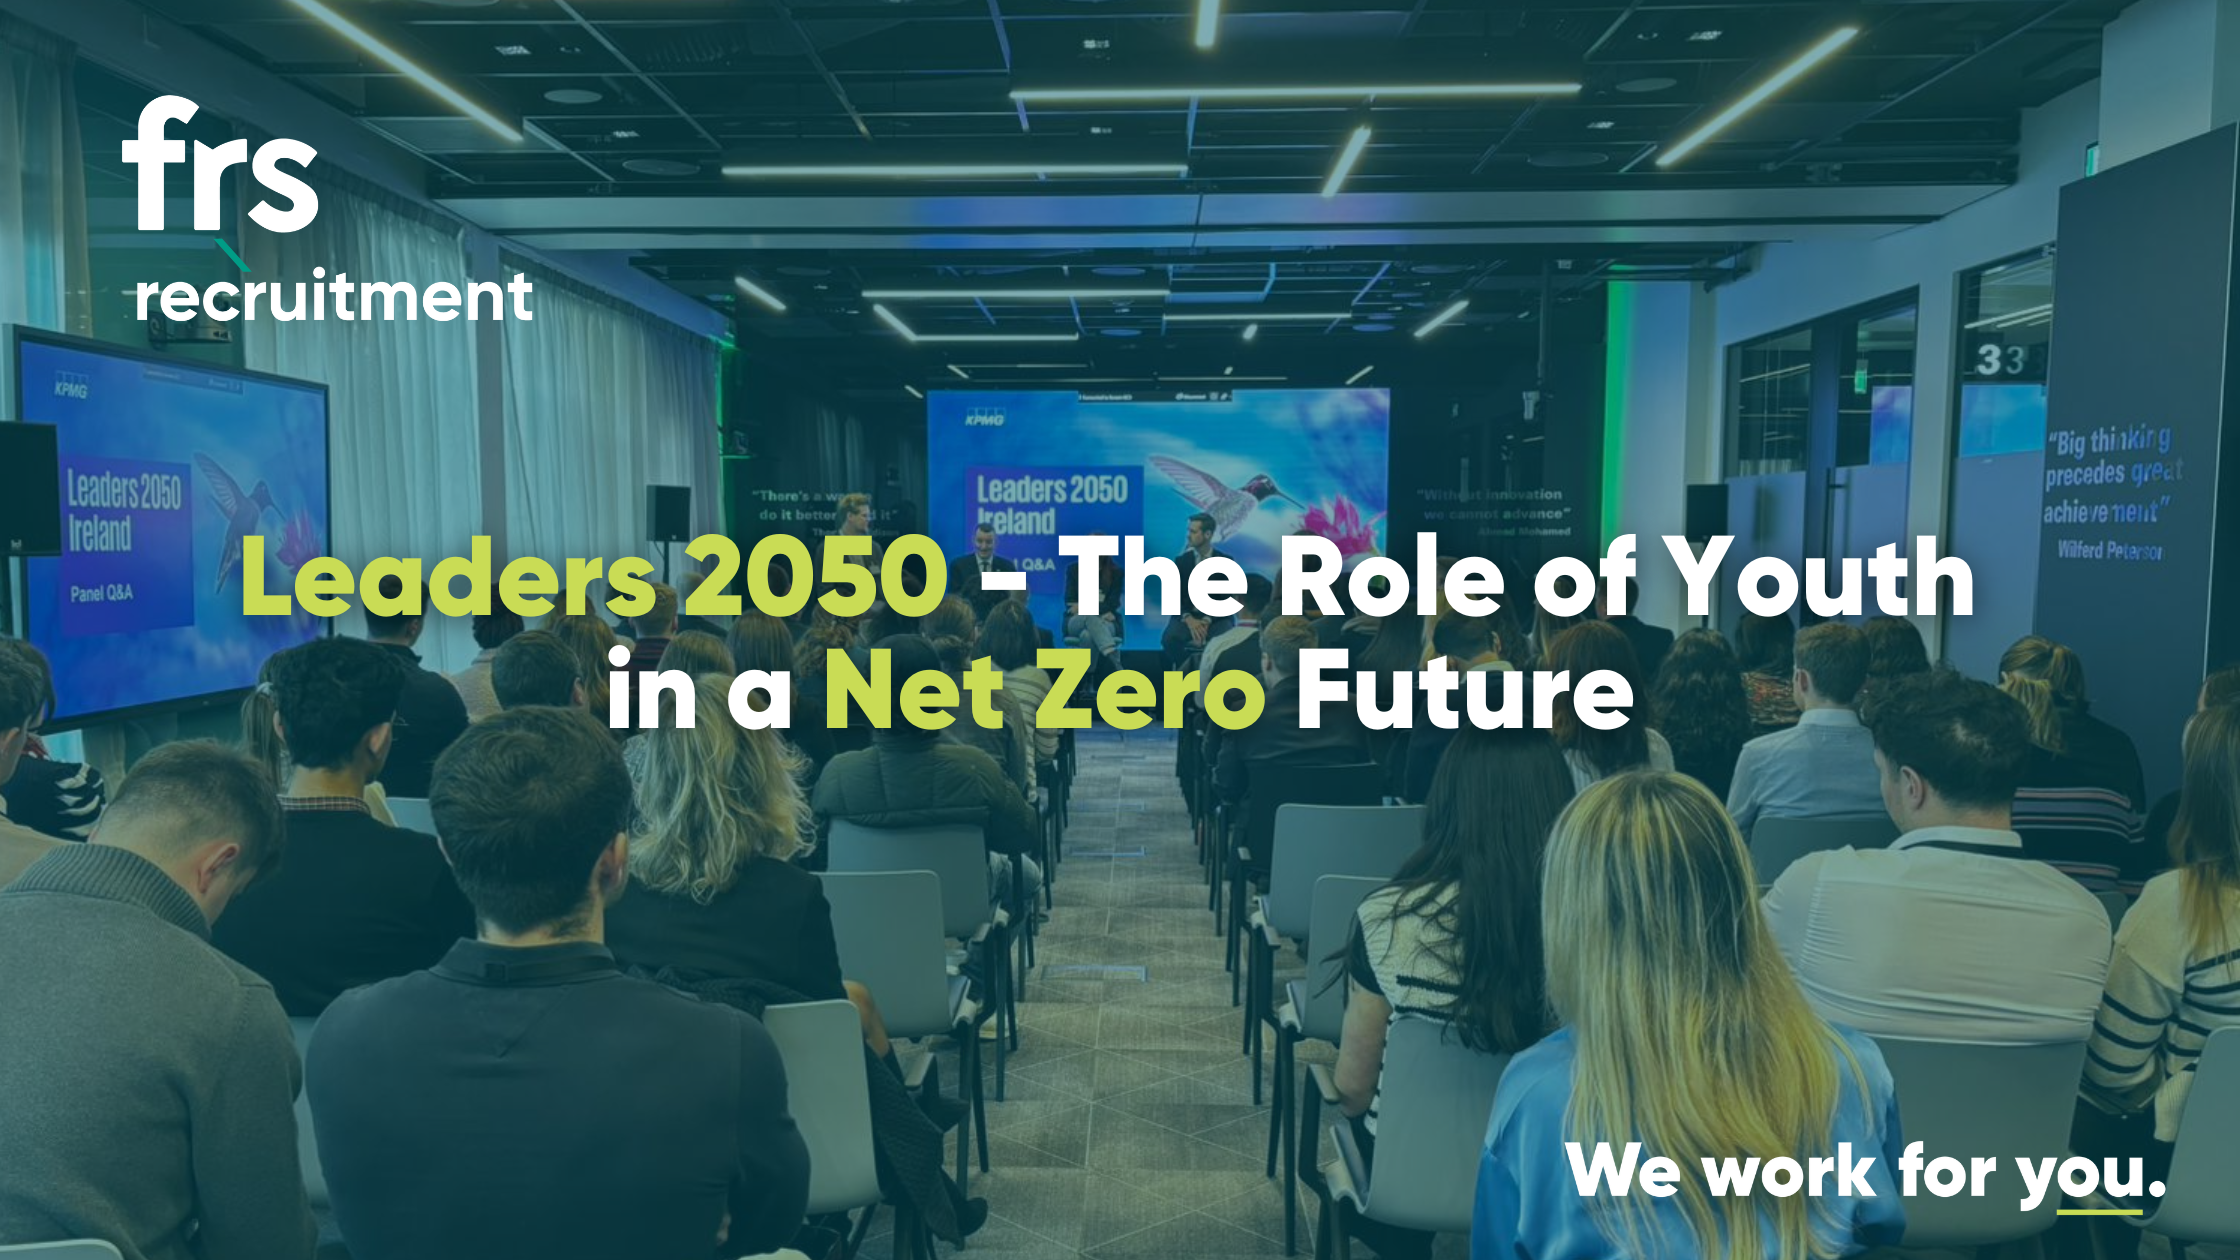 Leaders 2050 - The Role of Youth in a Net Zero Future